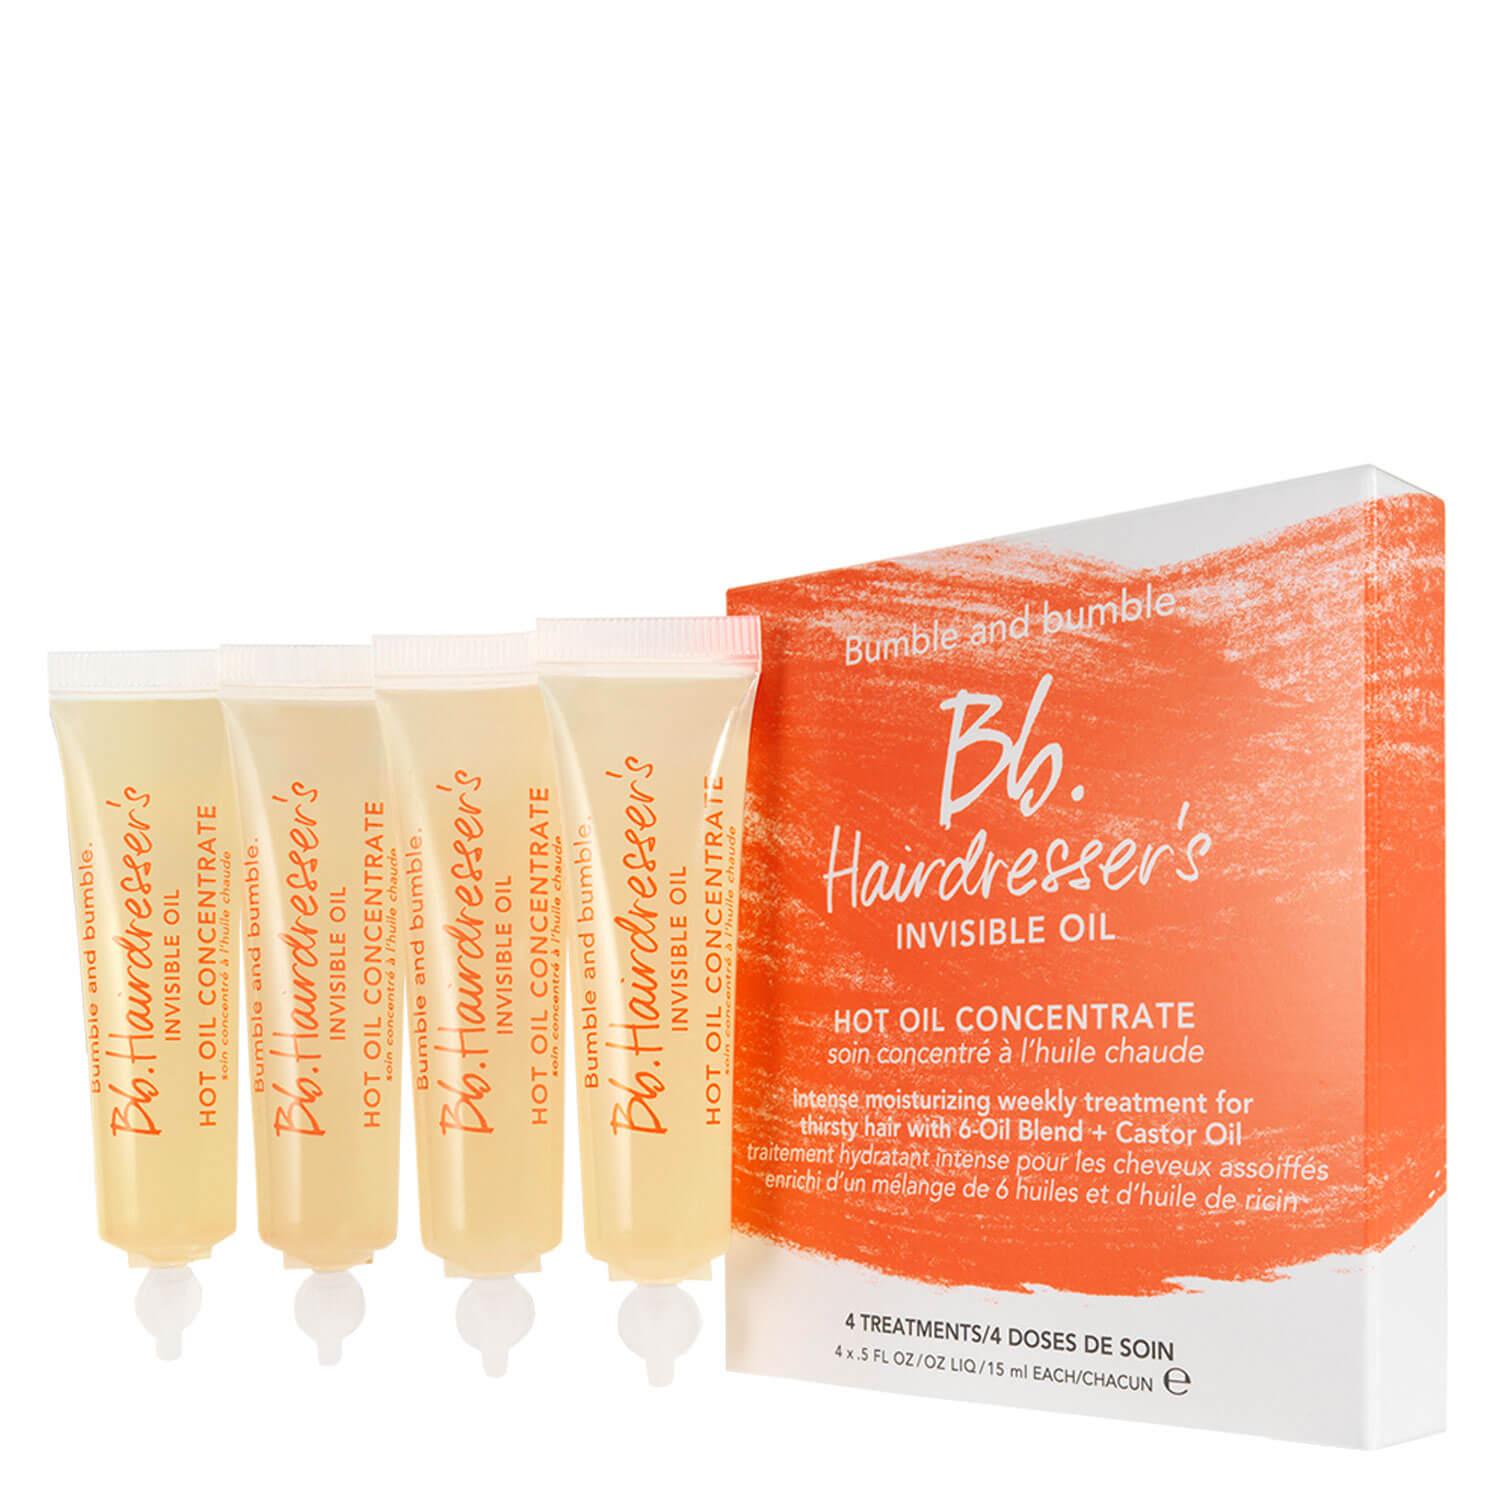 Bb. Hairdresser's Invisible Oil - Hairdresser's Invisible Oil Hot Oil 4-Pack